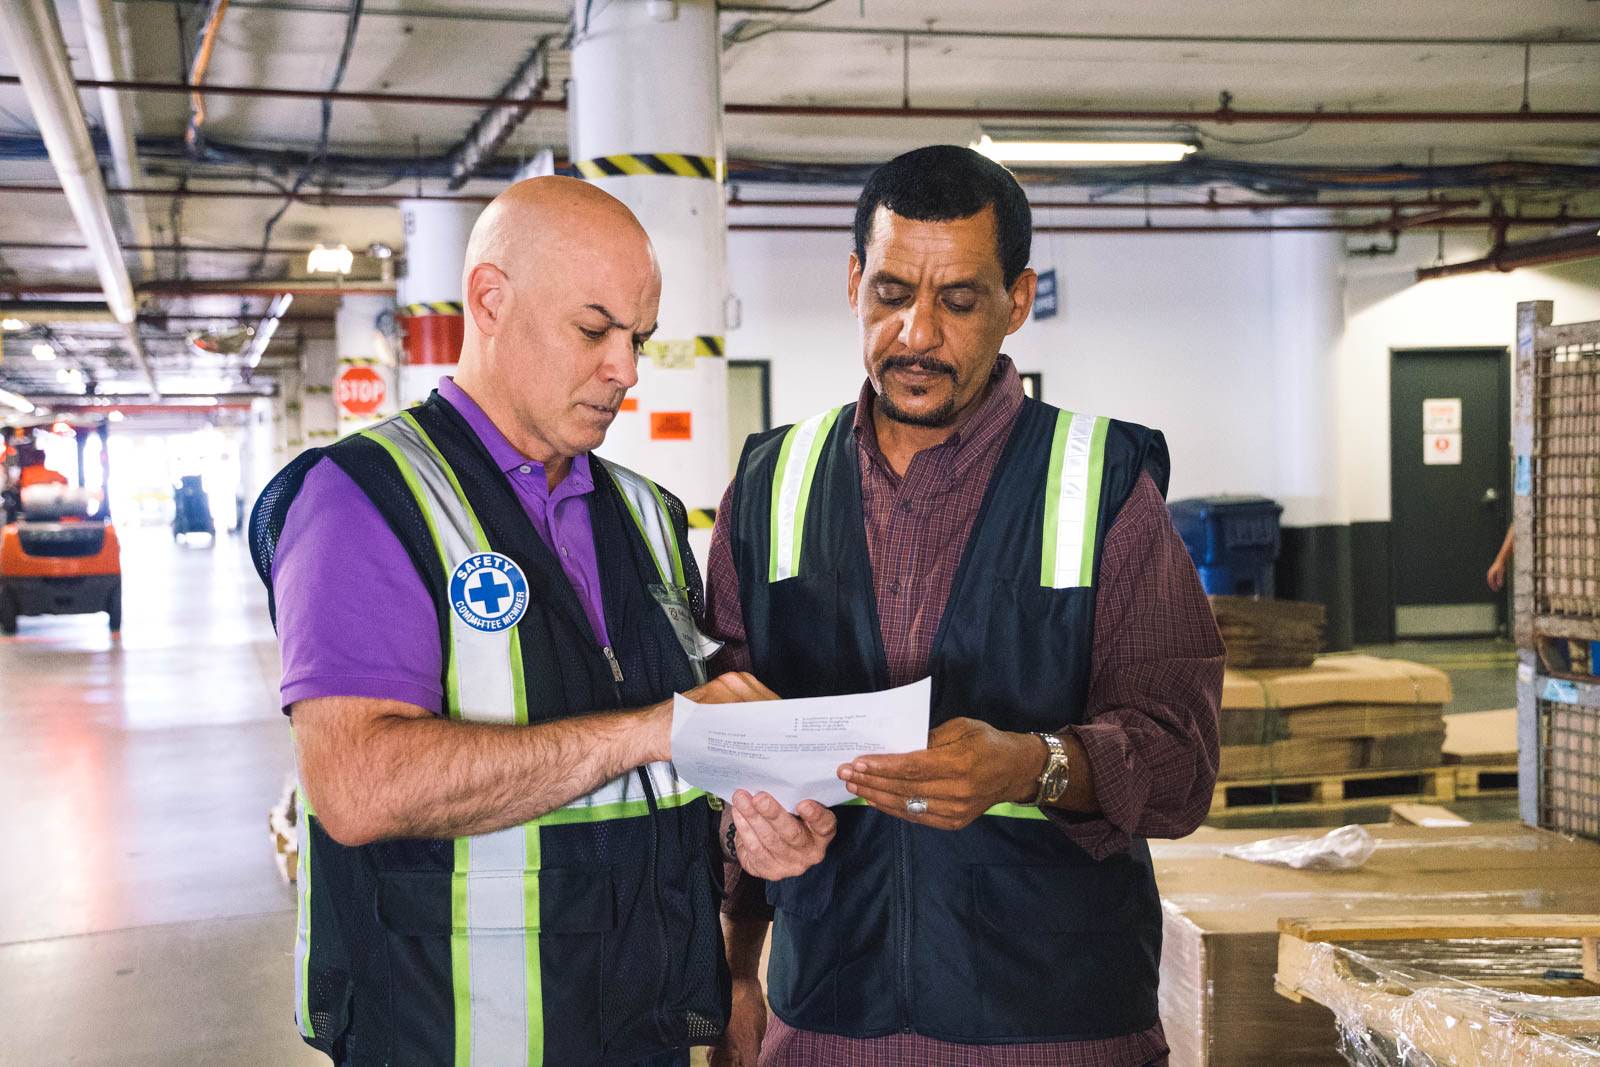 Two warehouse employees review an order form together